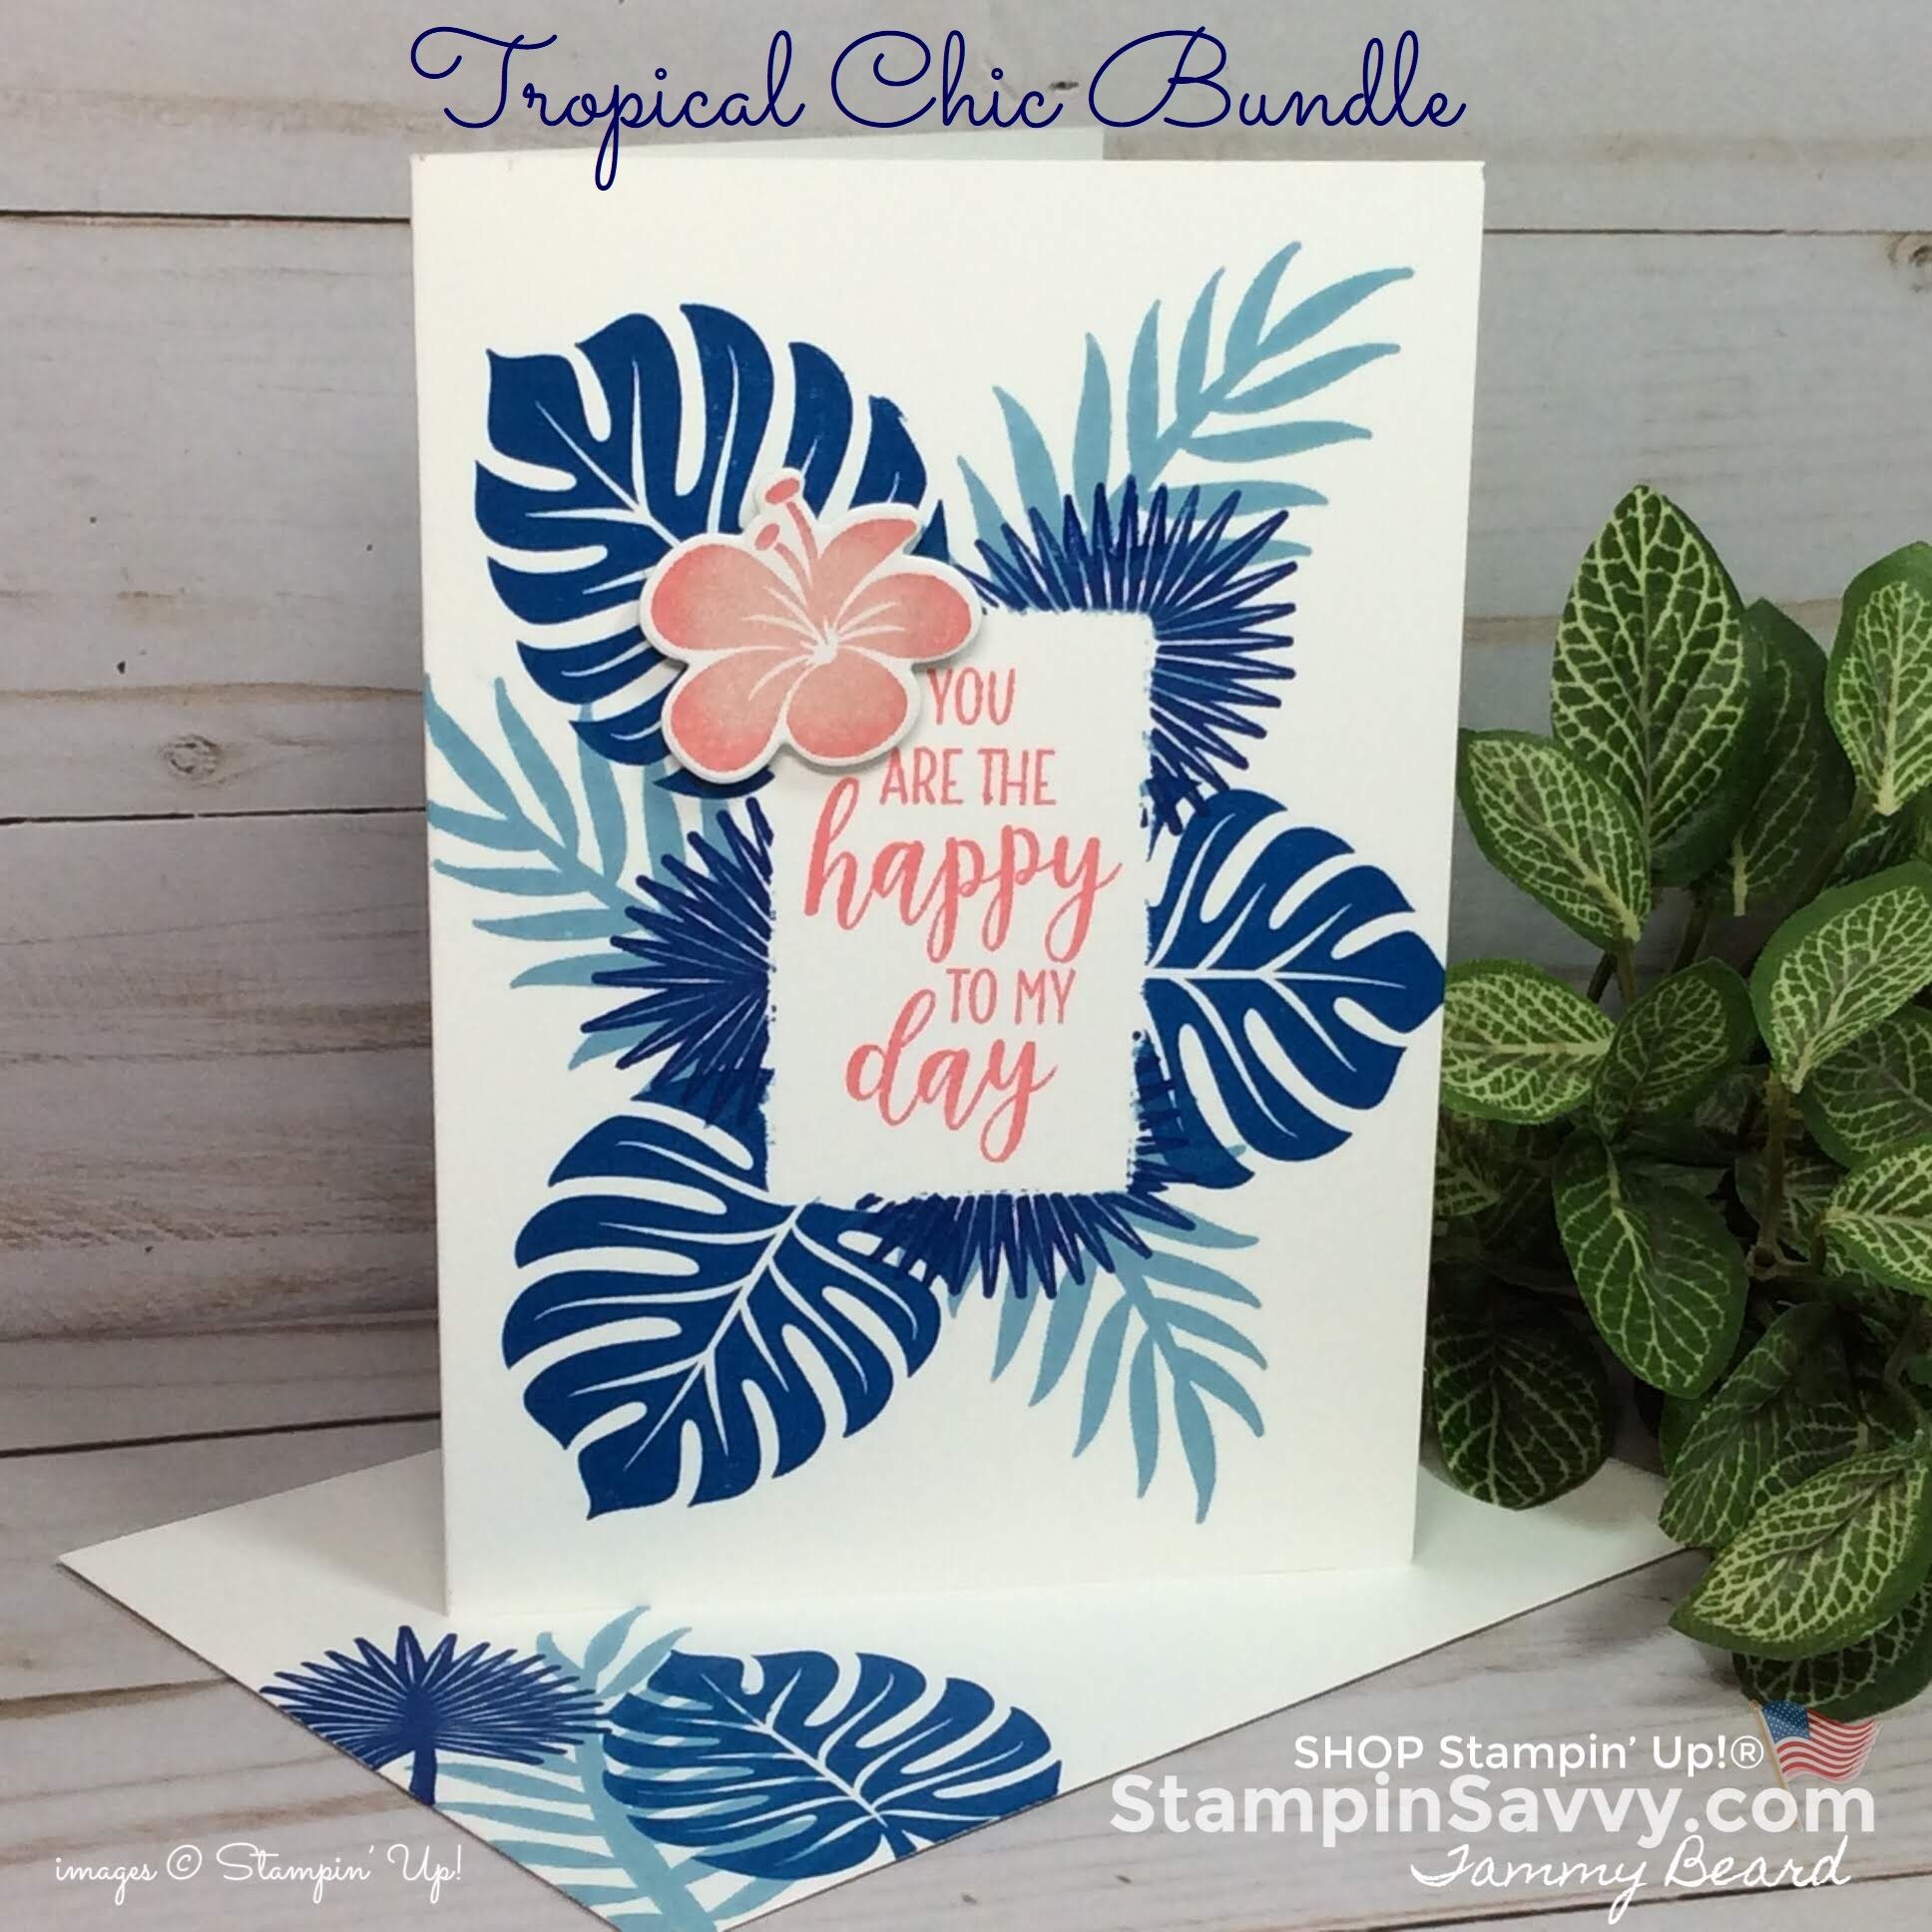 Papercraft Techniques Tropical Chic Stampin Up Cards with Simple Masking Technique